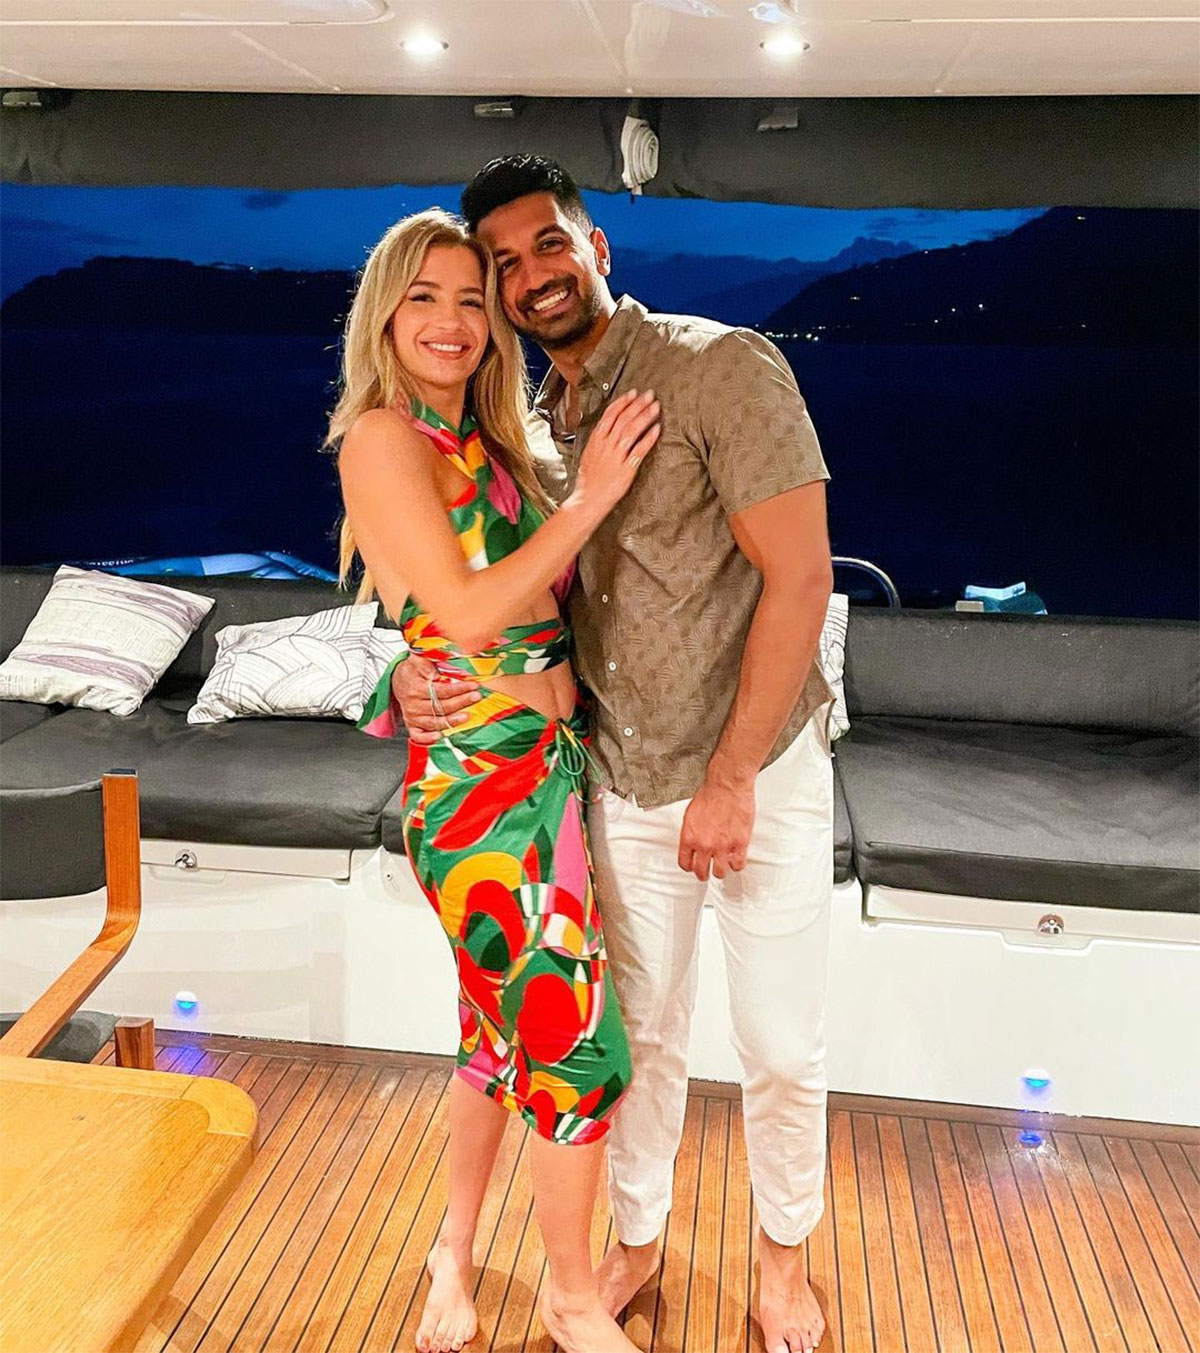 June 2021 Metul Shah Instagram Southern Charm Naomie Olindo and Metul Shah Relationship Timeline